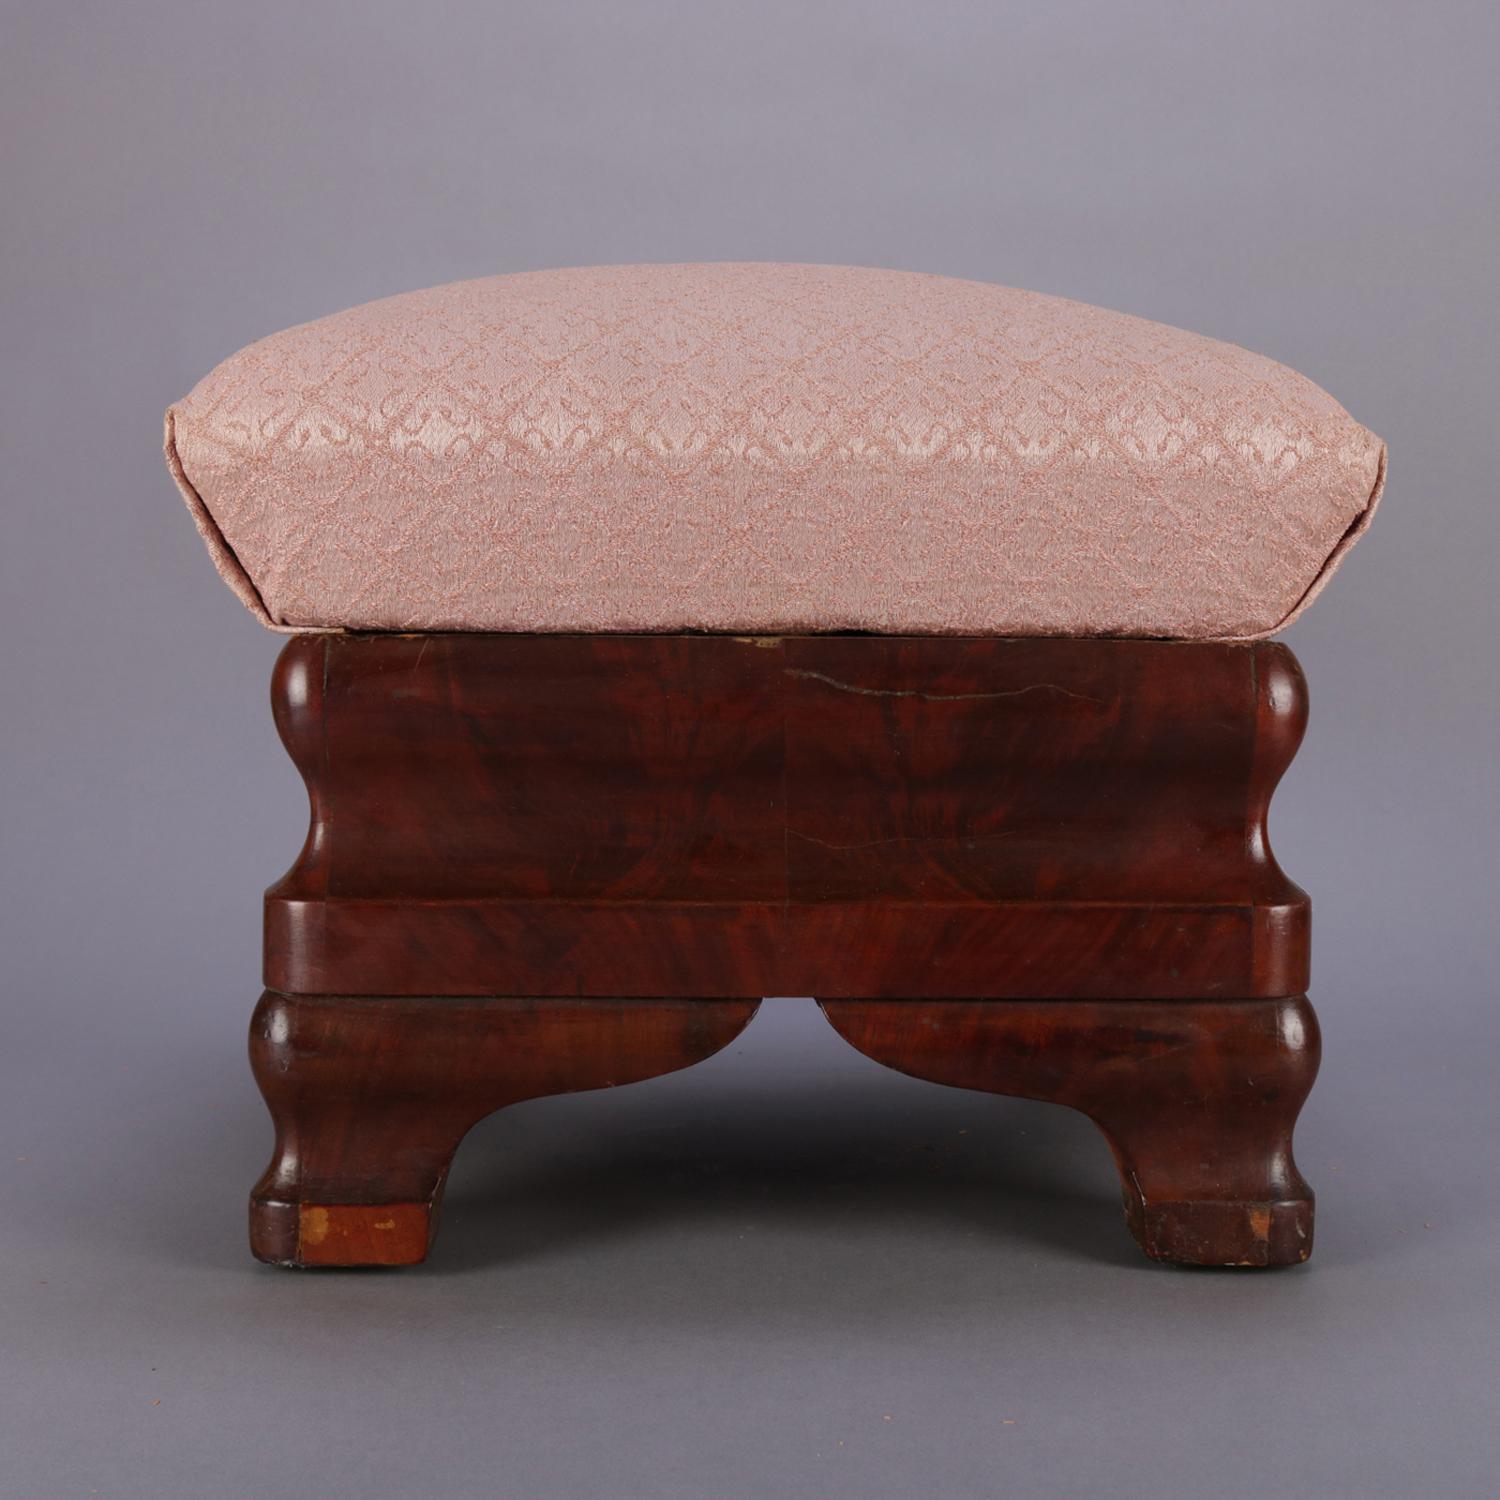 Upholstery Pair of Antique American Empire Ogee Flame Mahogany Footstools with Storage